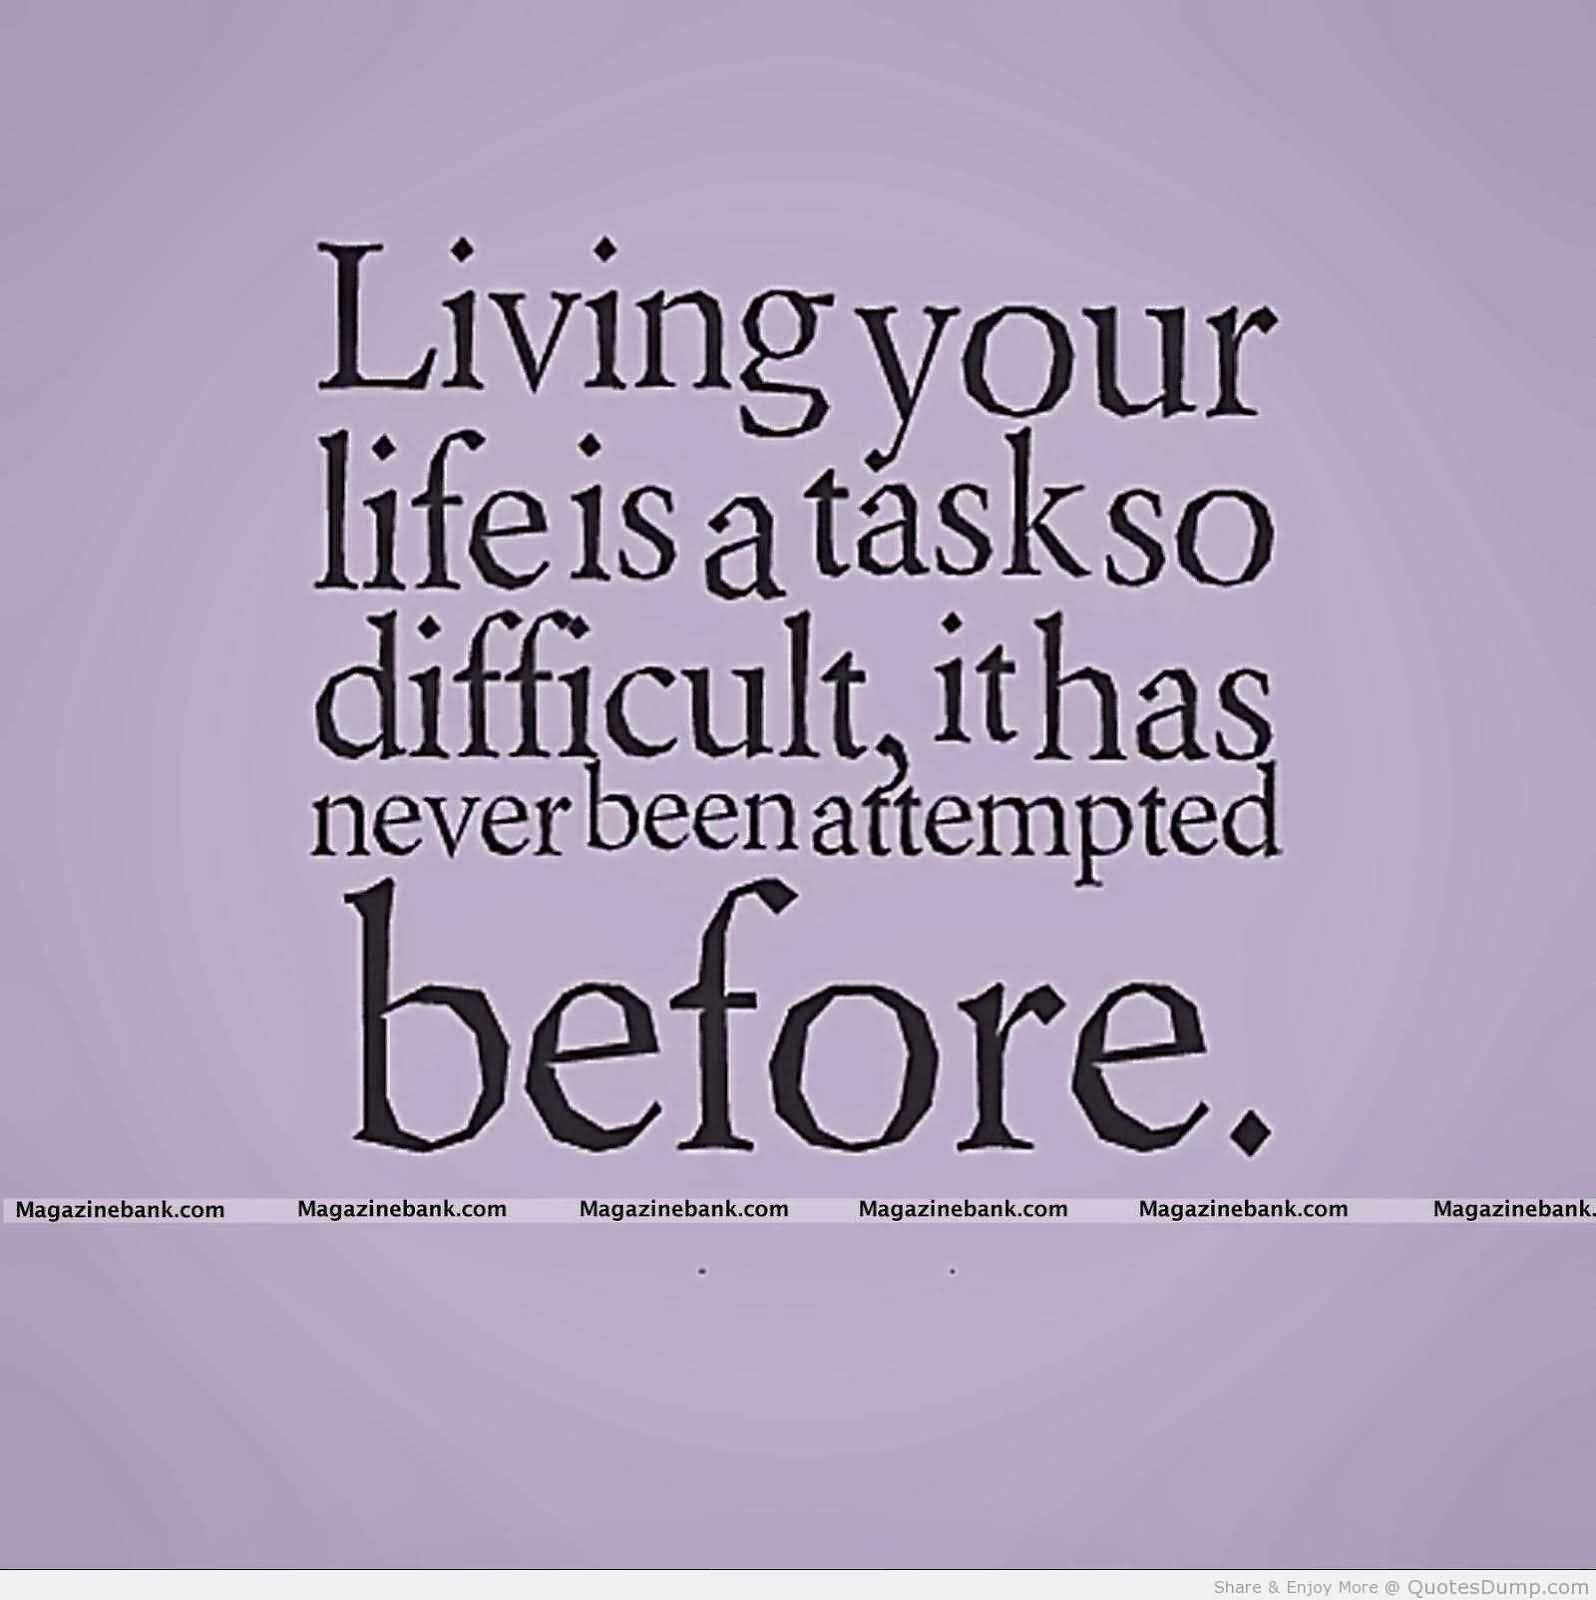 Living your life is a task so difficult it has never been attempted before